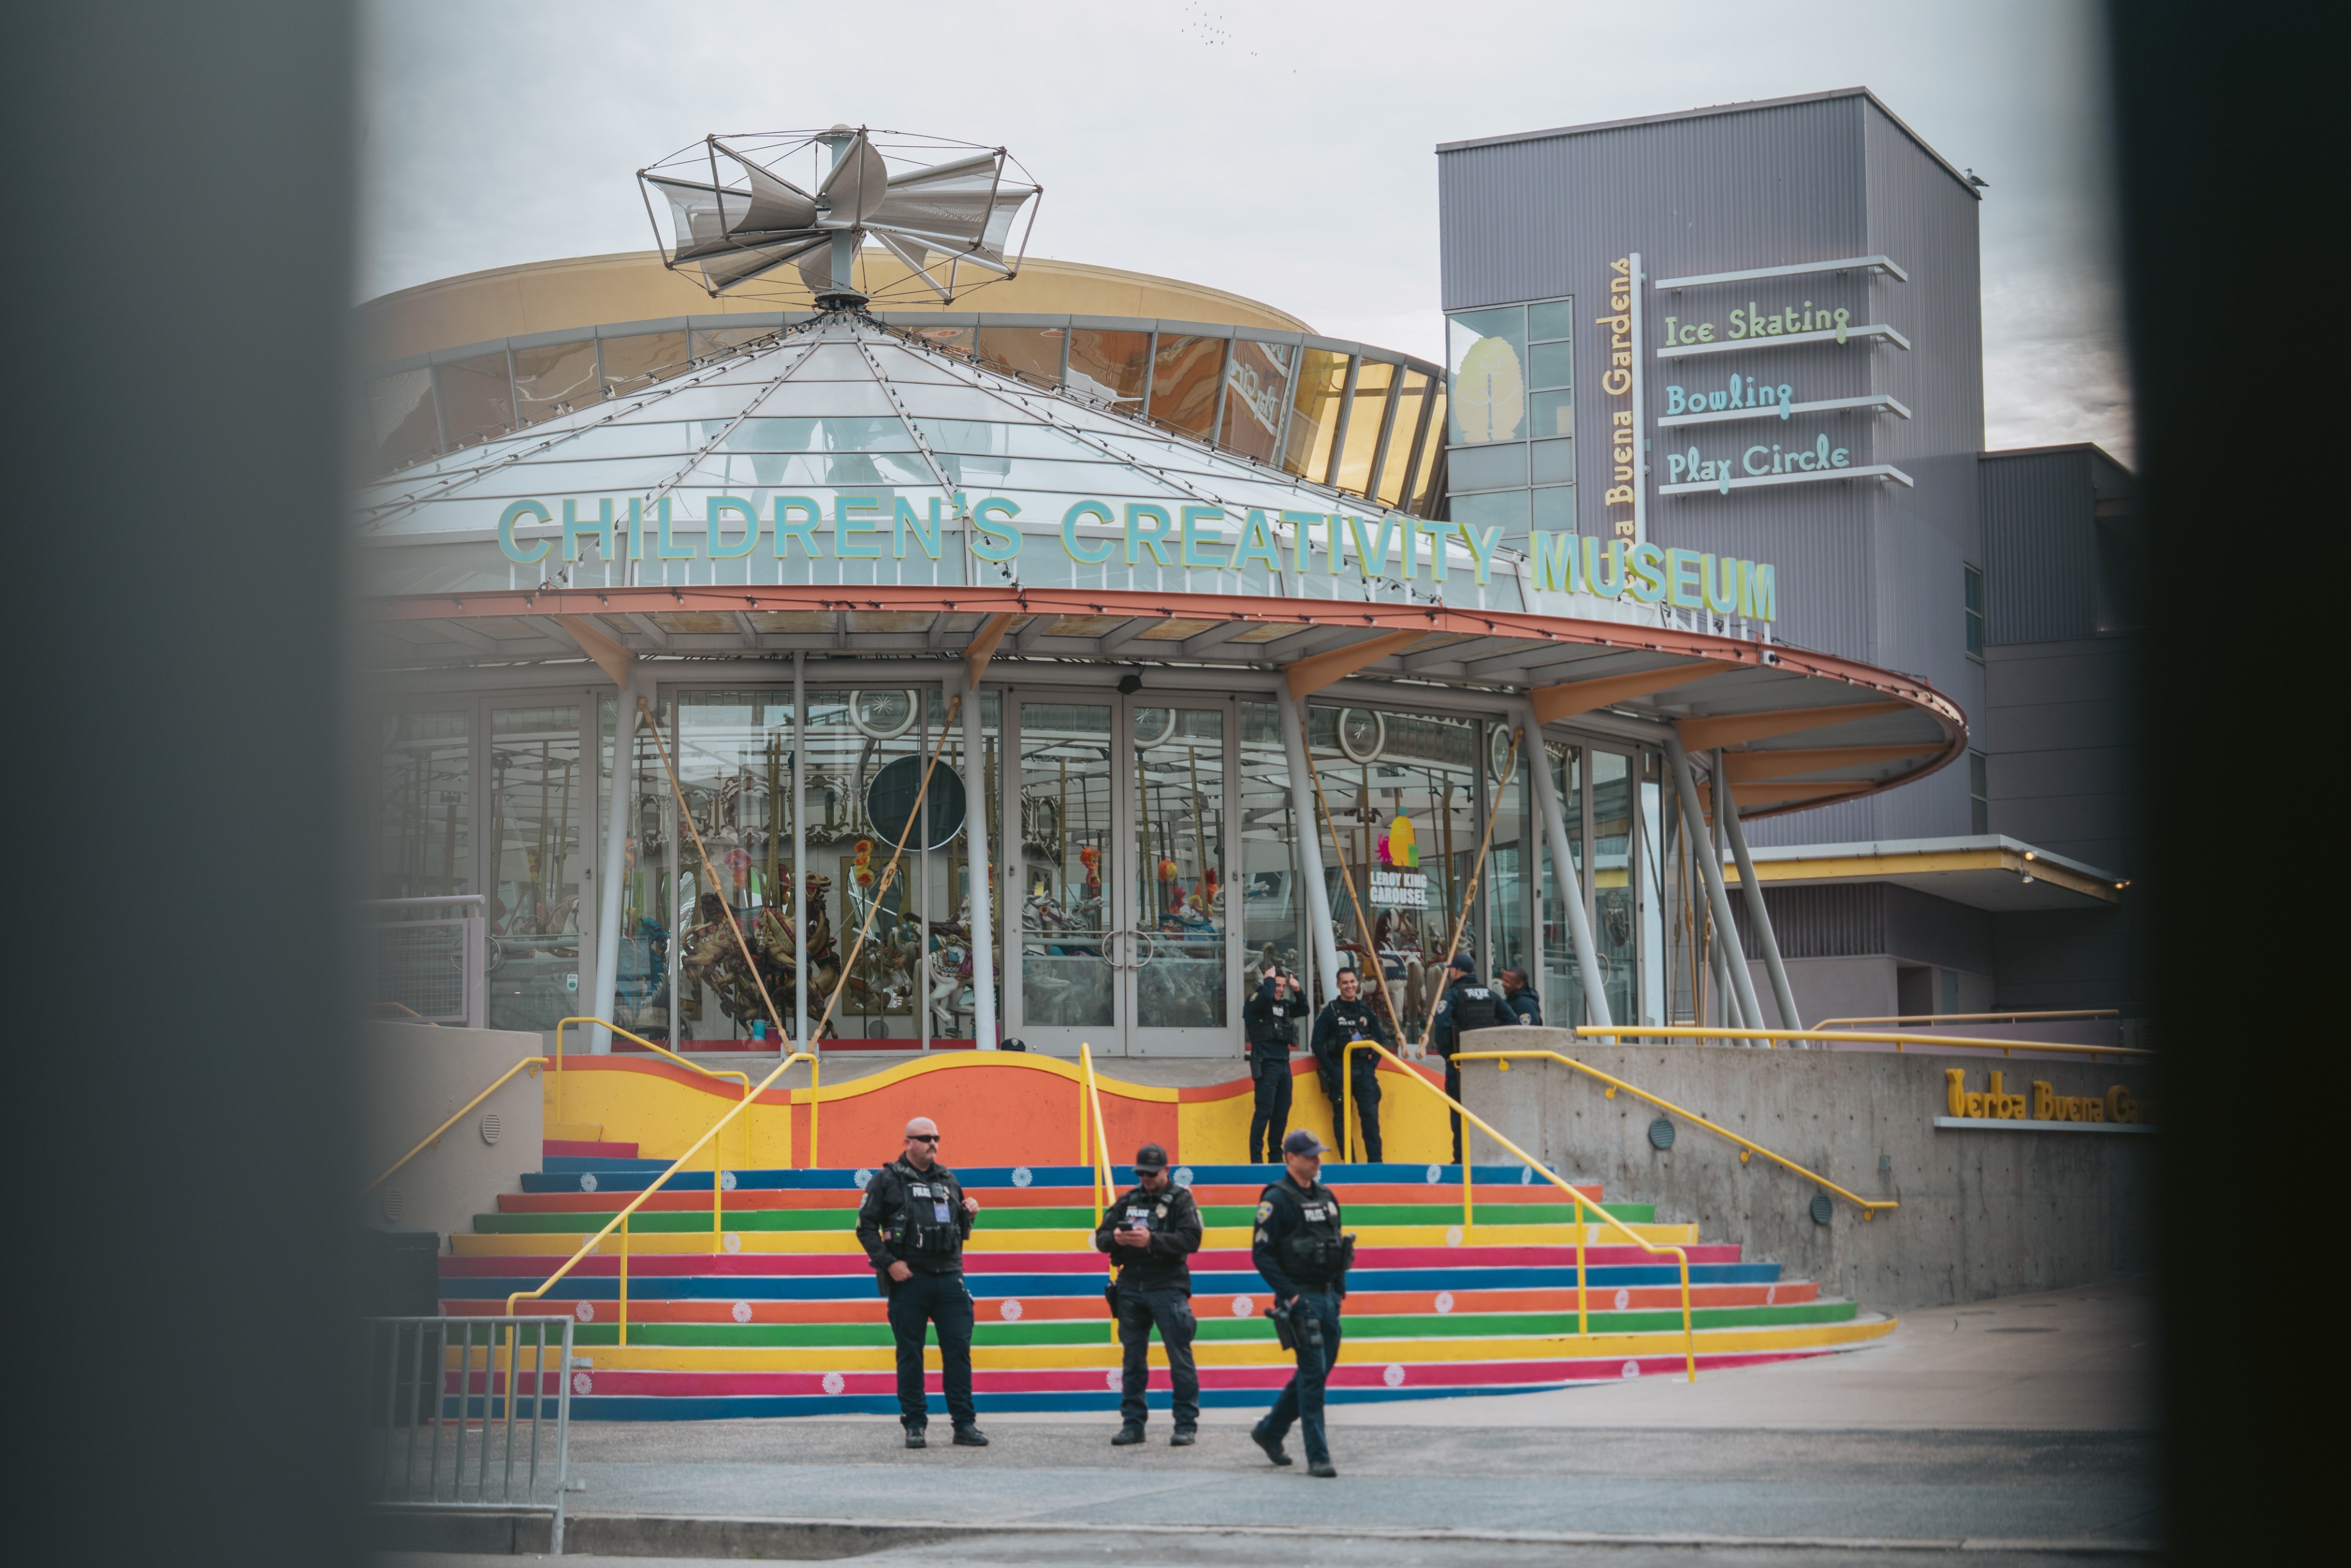 A group of police officers stand near a carousel that reads the Children's Creativity Musuem.